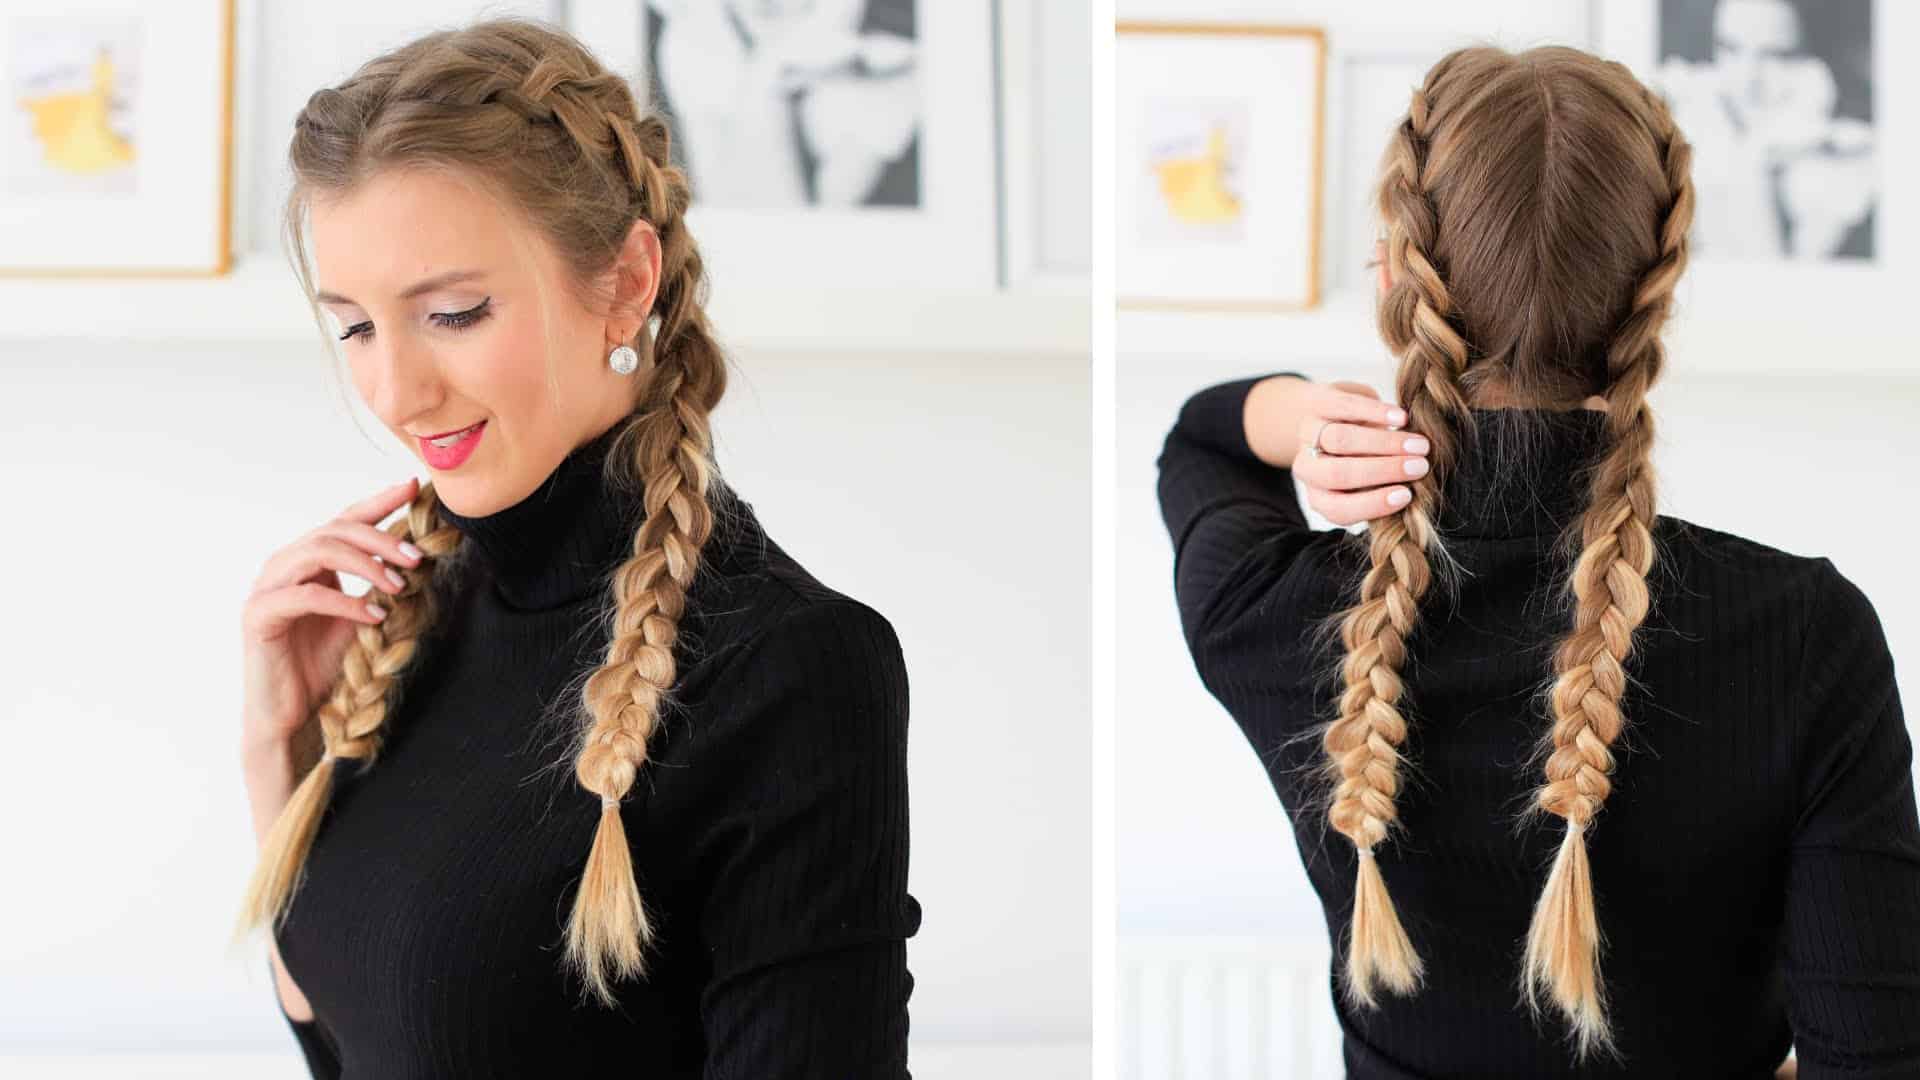 15 Braided Hairstyles Made For Long Locks